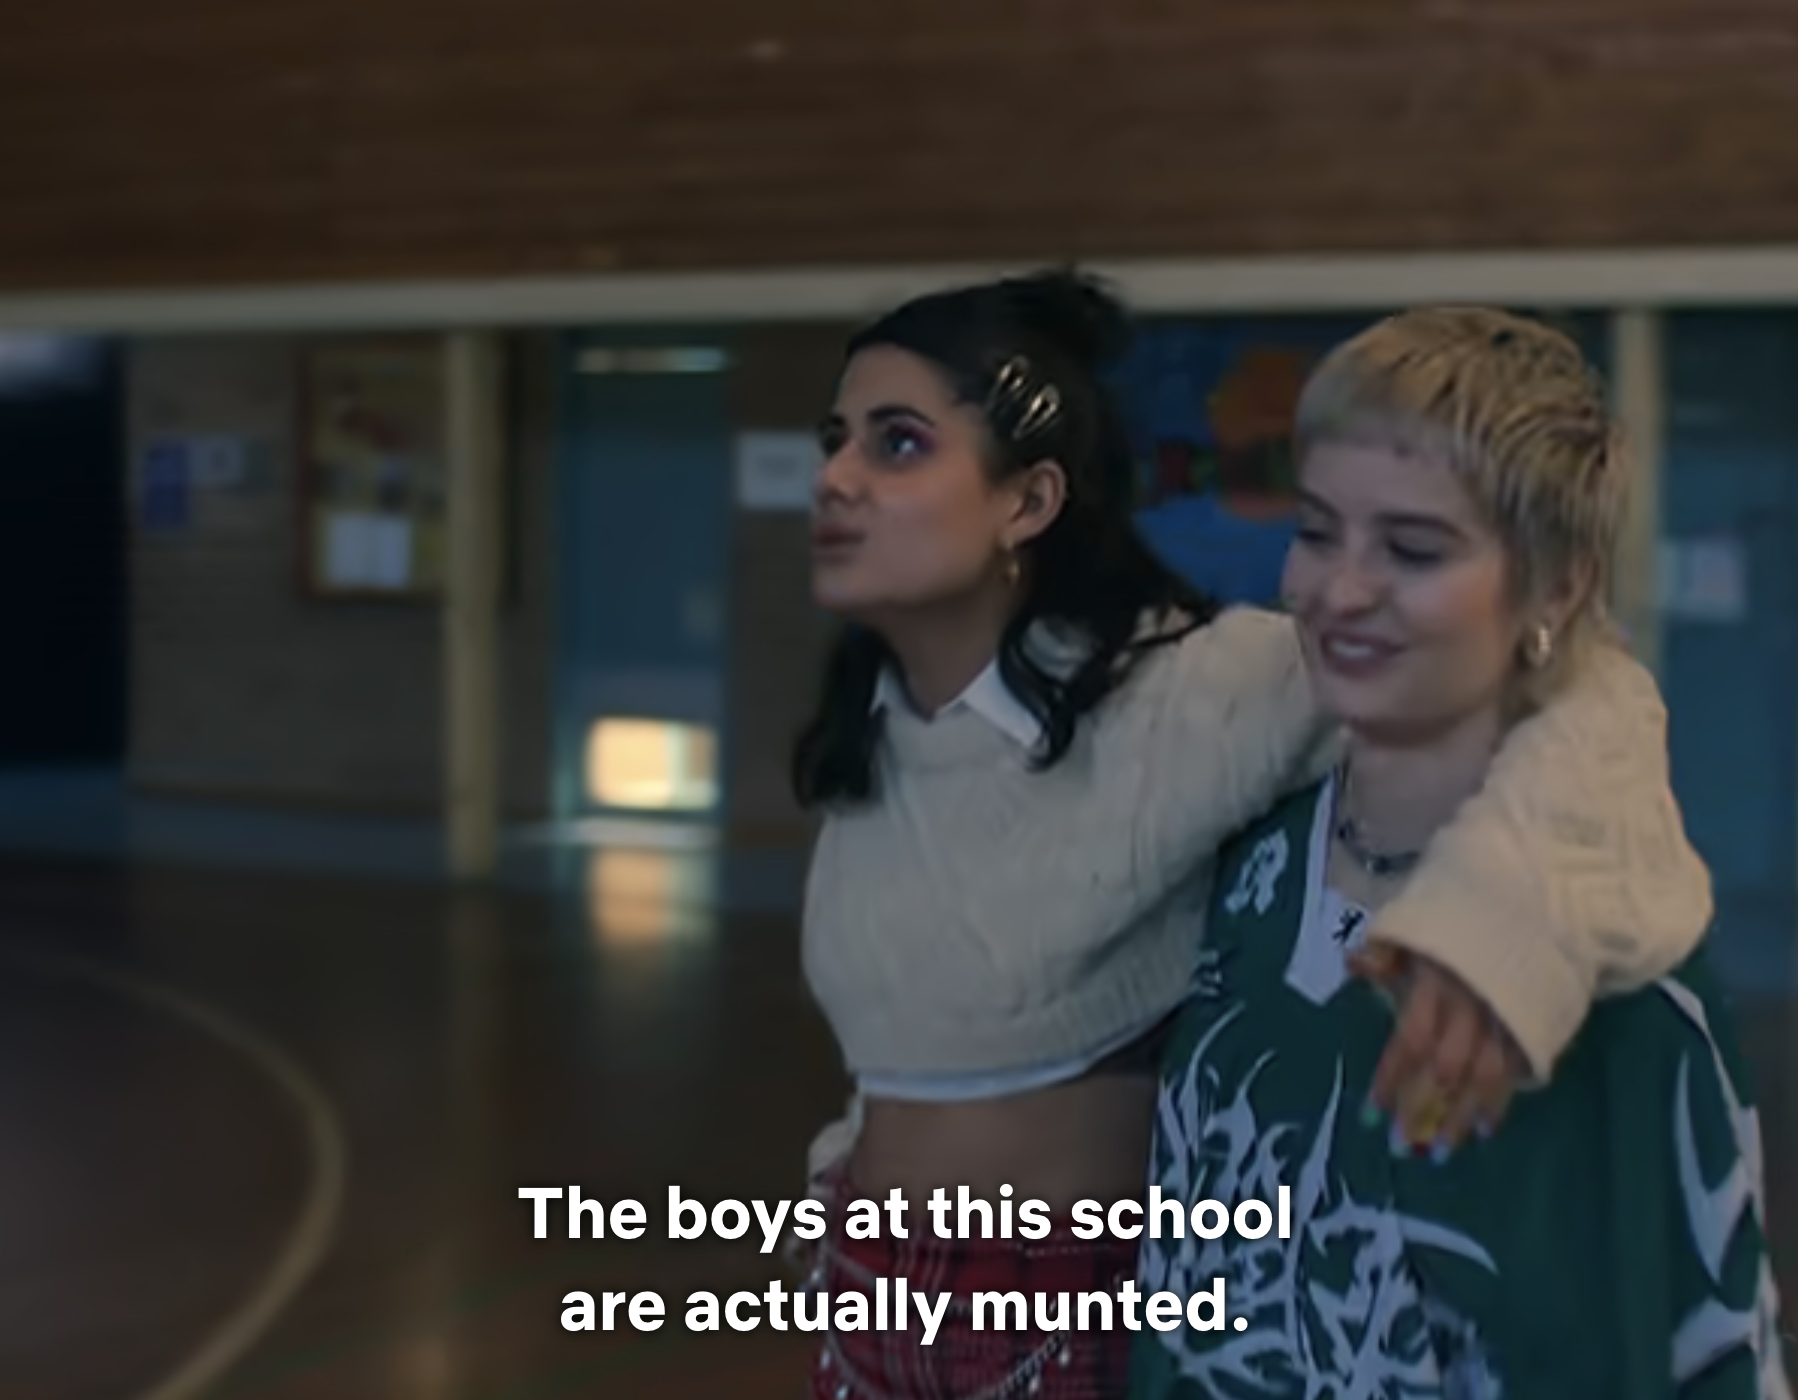 Two characters in a school hallway, one consoling the other, with a subtitle